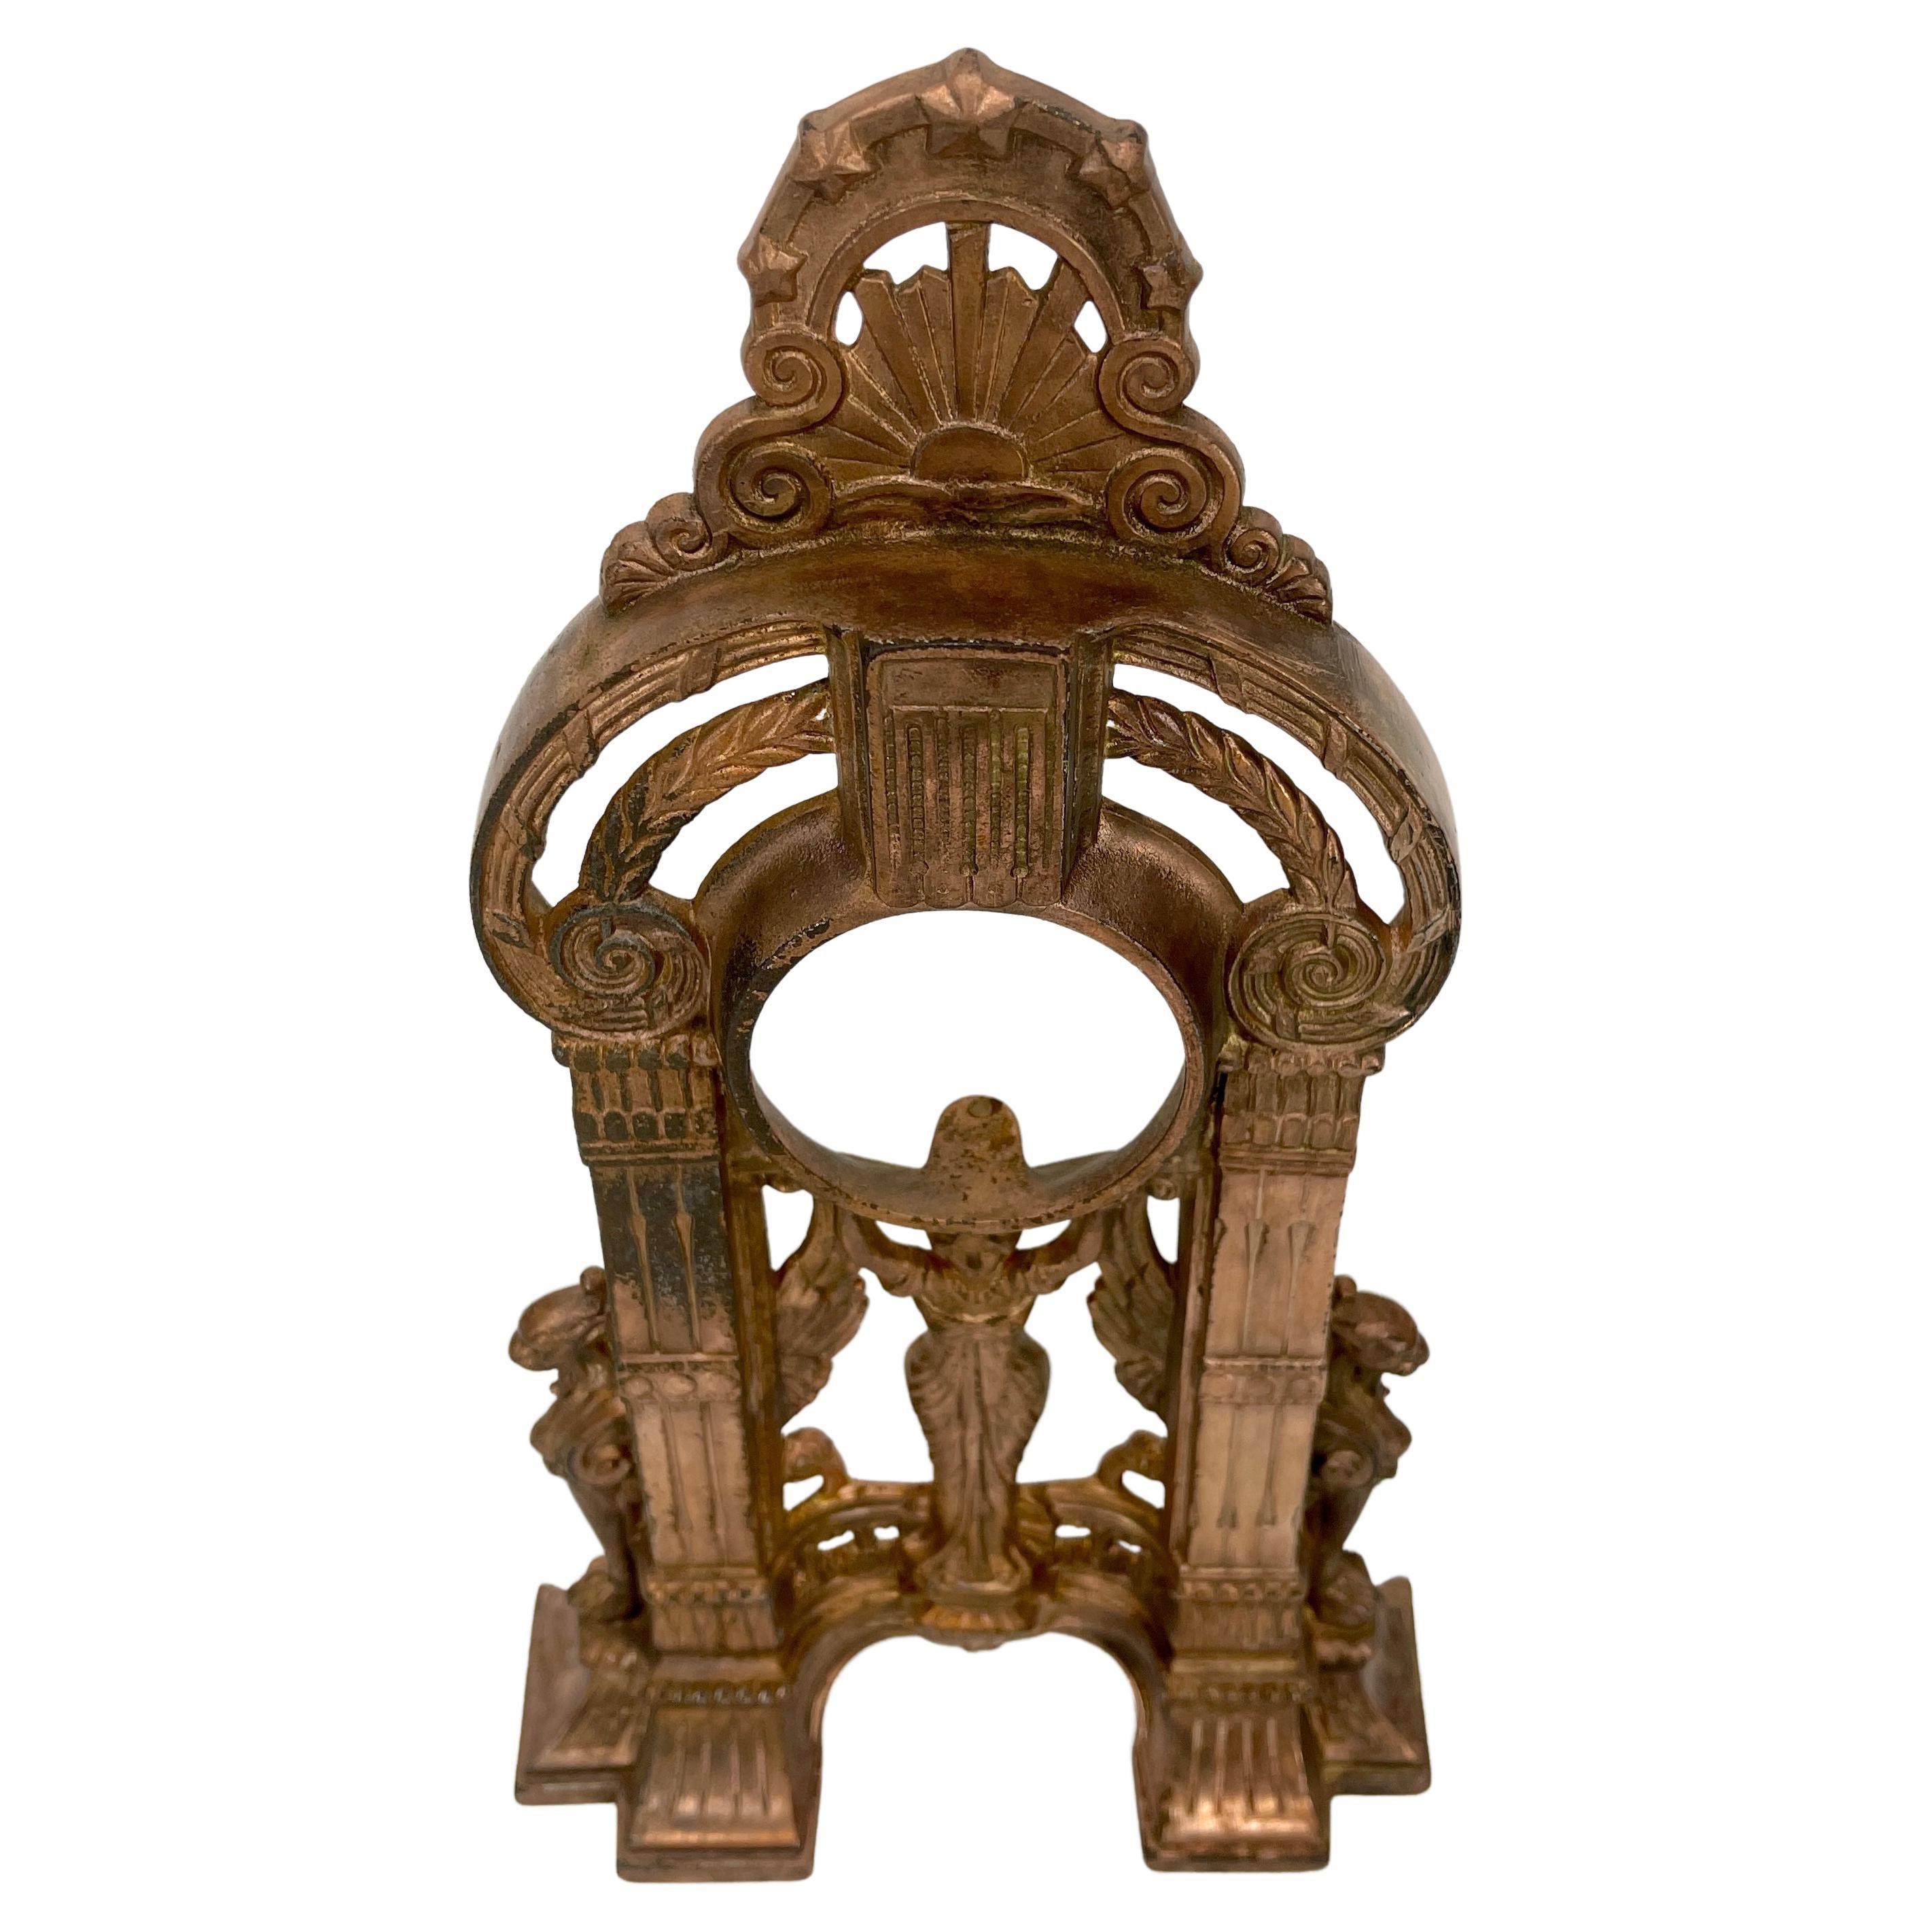 Amazing French Empire gilt bronze watch stand, Marked 486.

